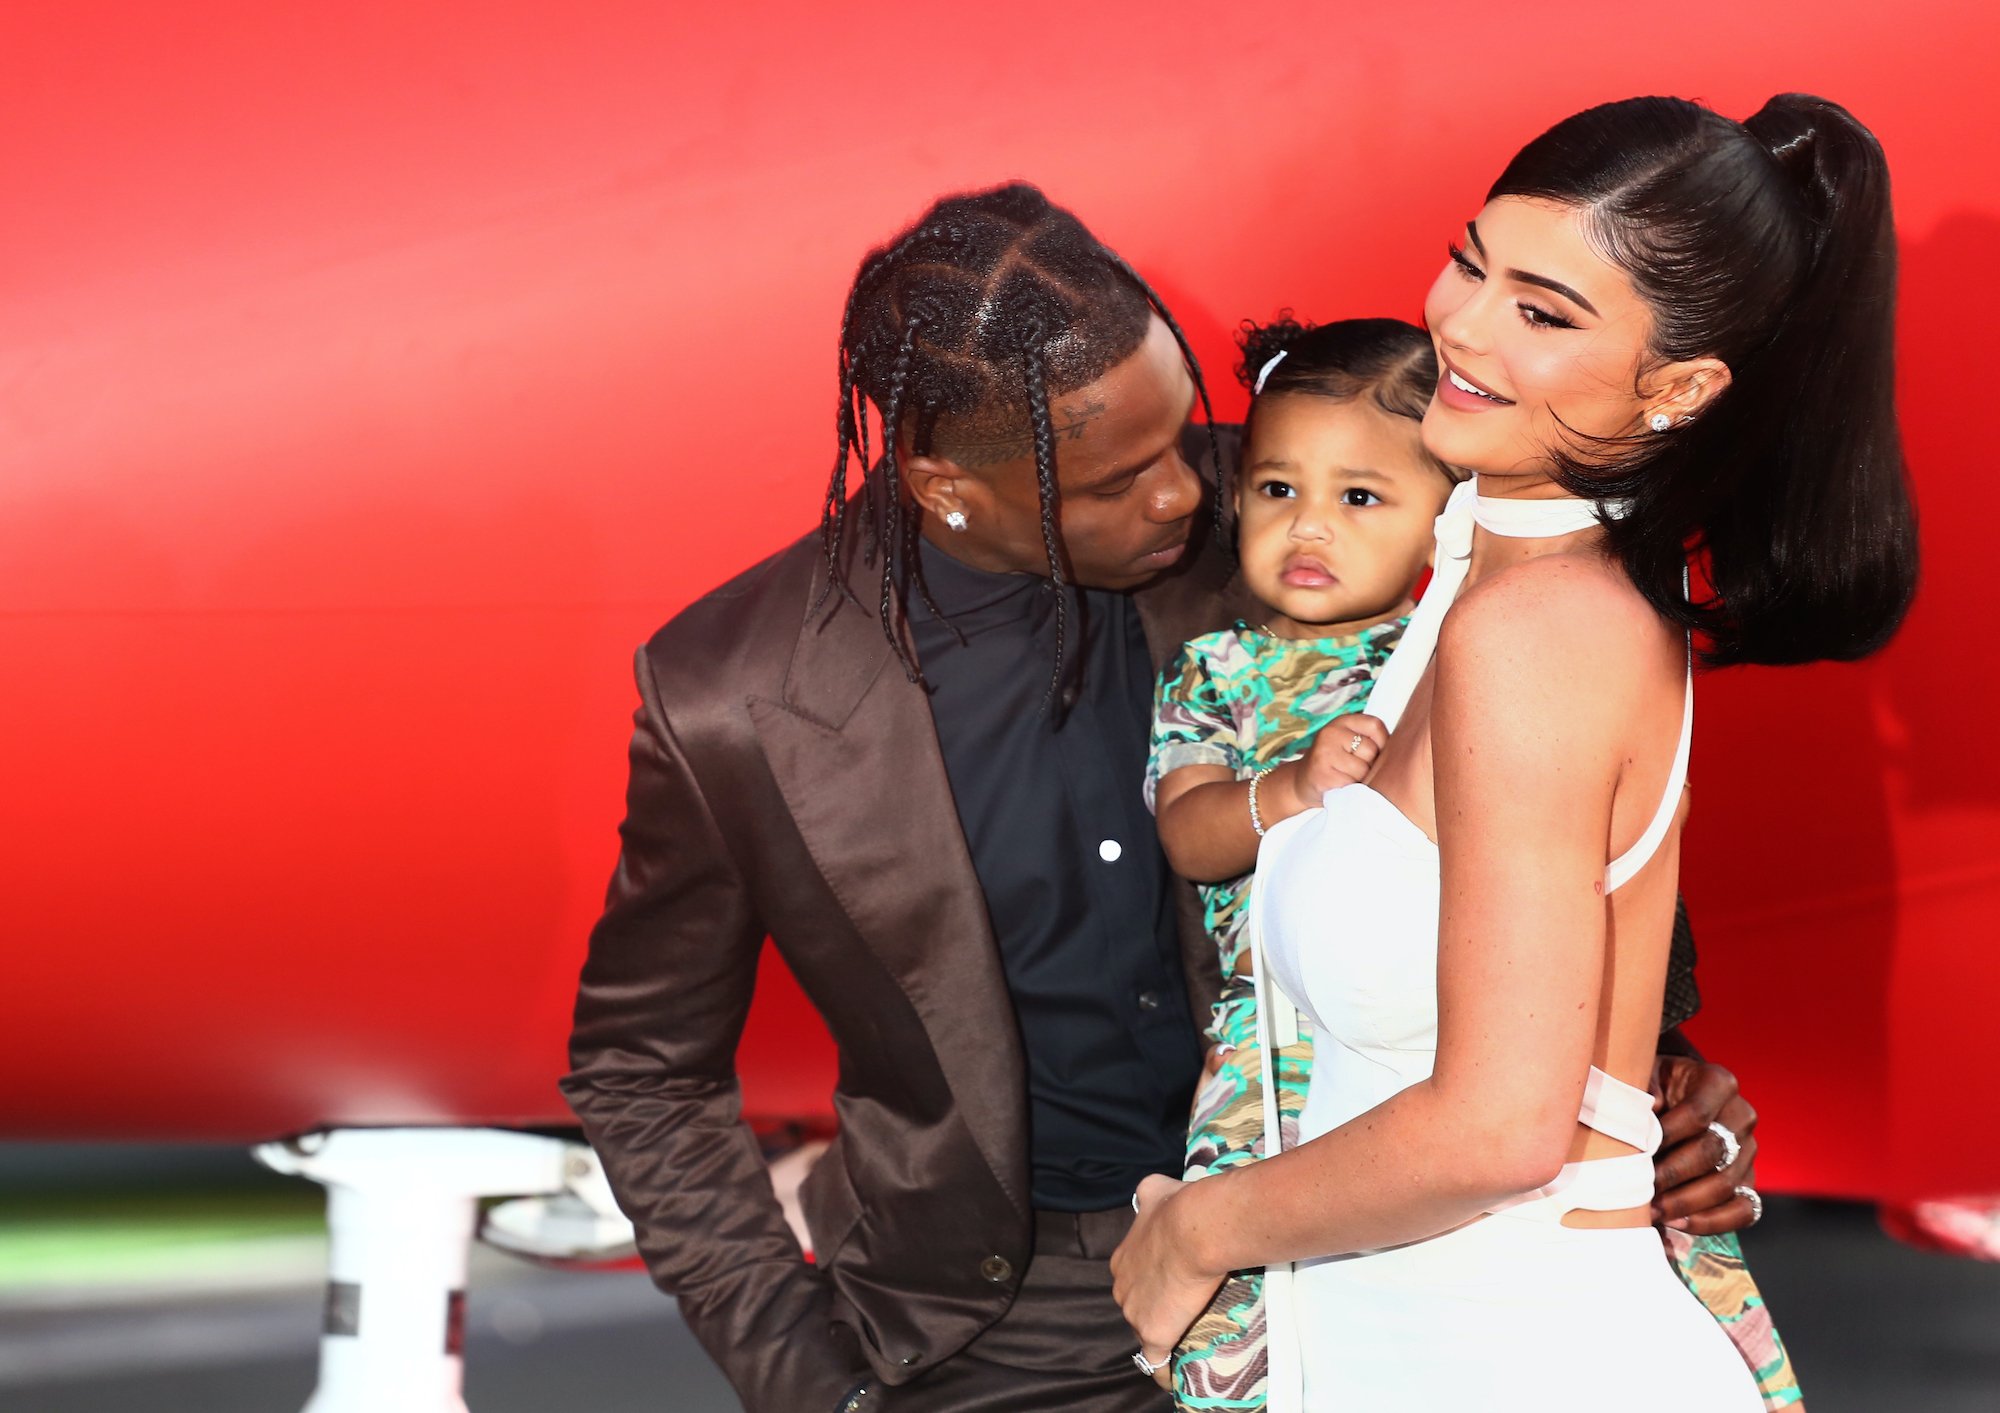 (L-R) Travis Scott, Stormi Webster, and Kylie Jenner smiling in front of a red background